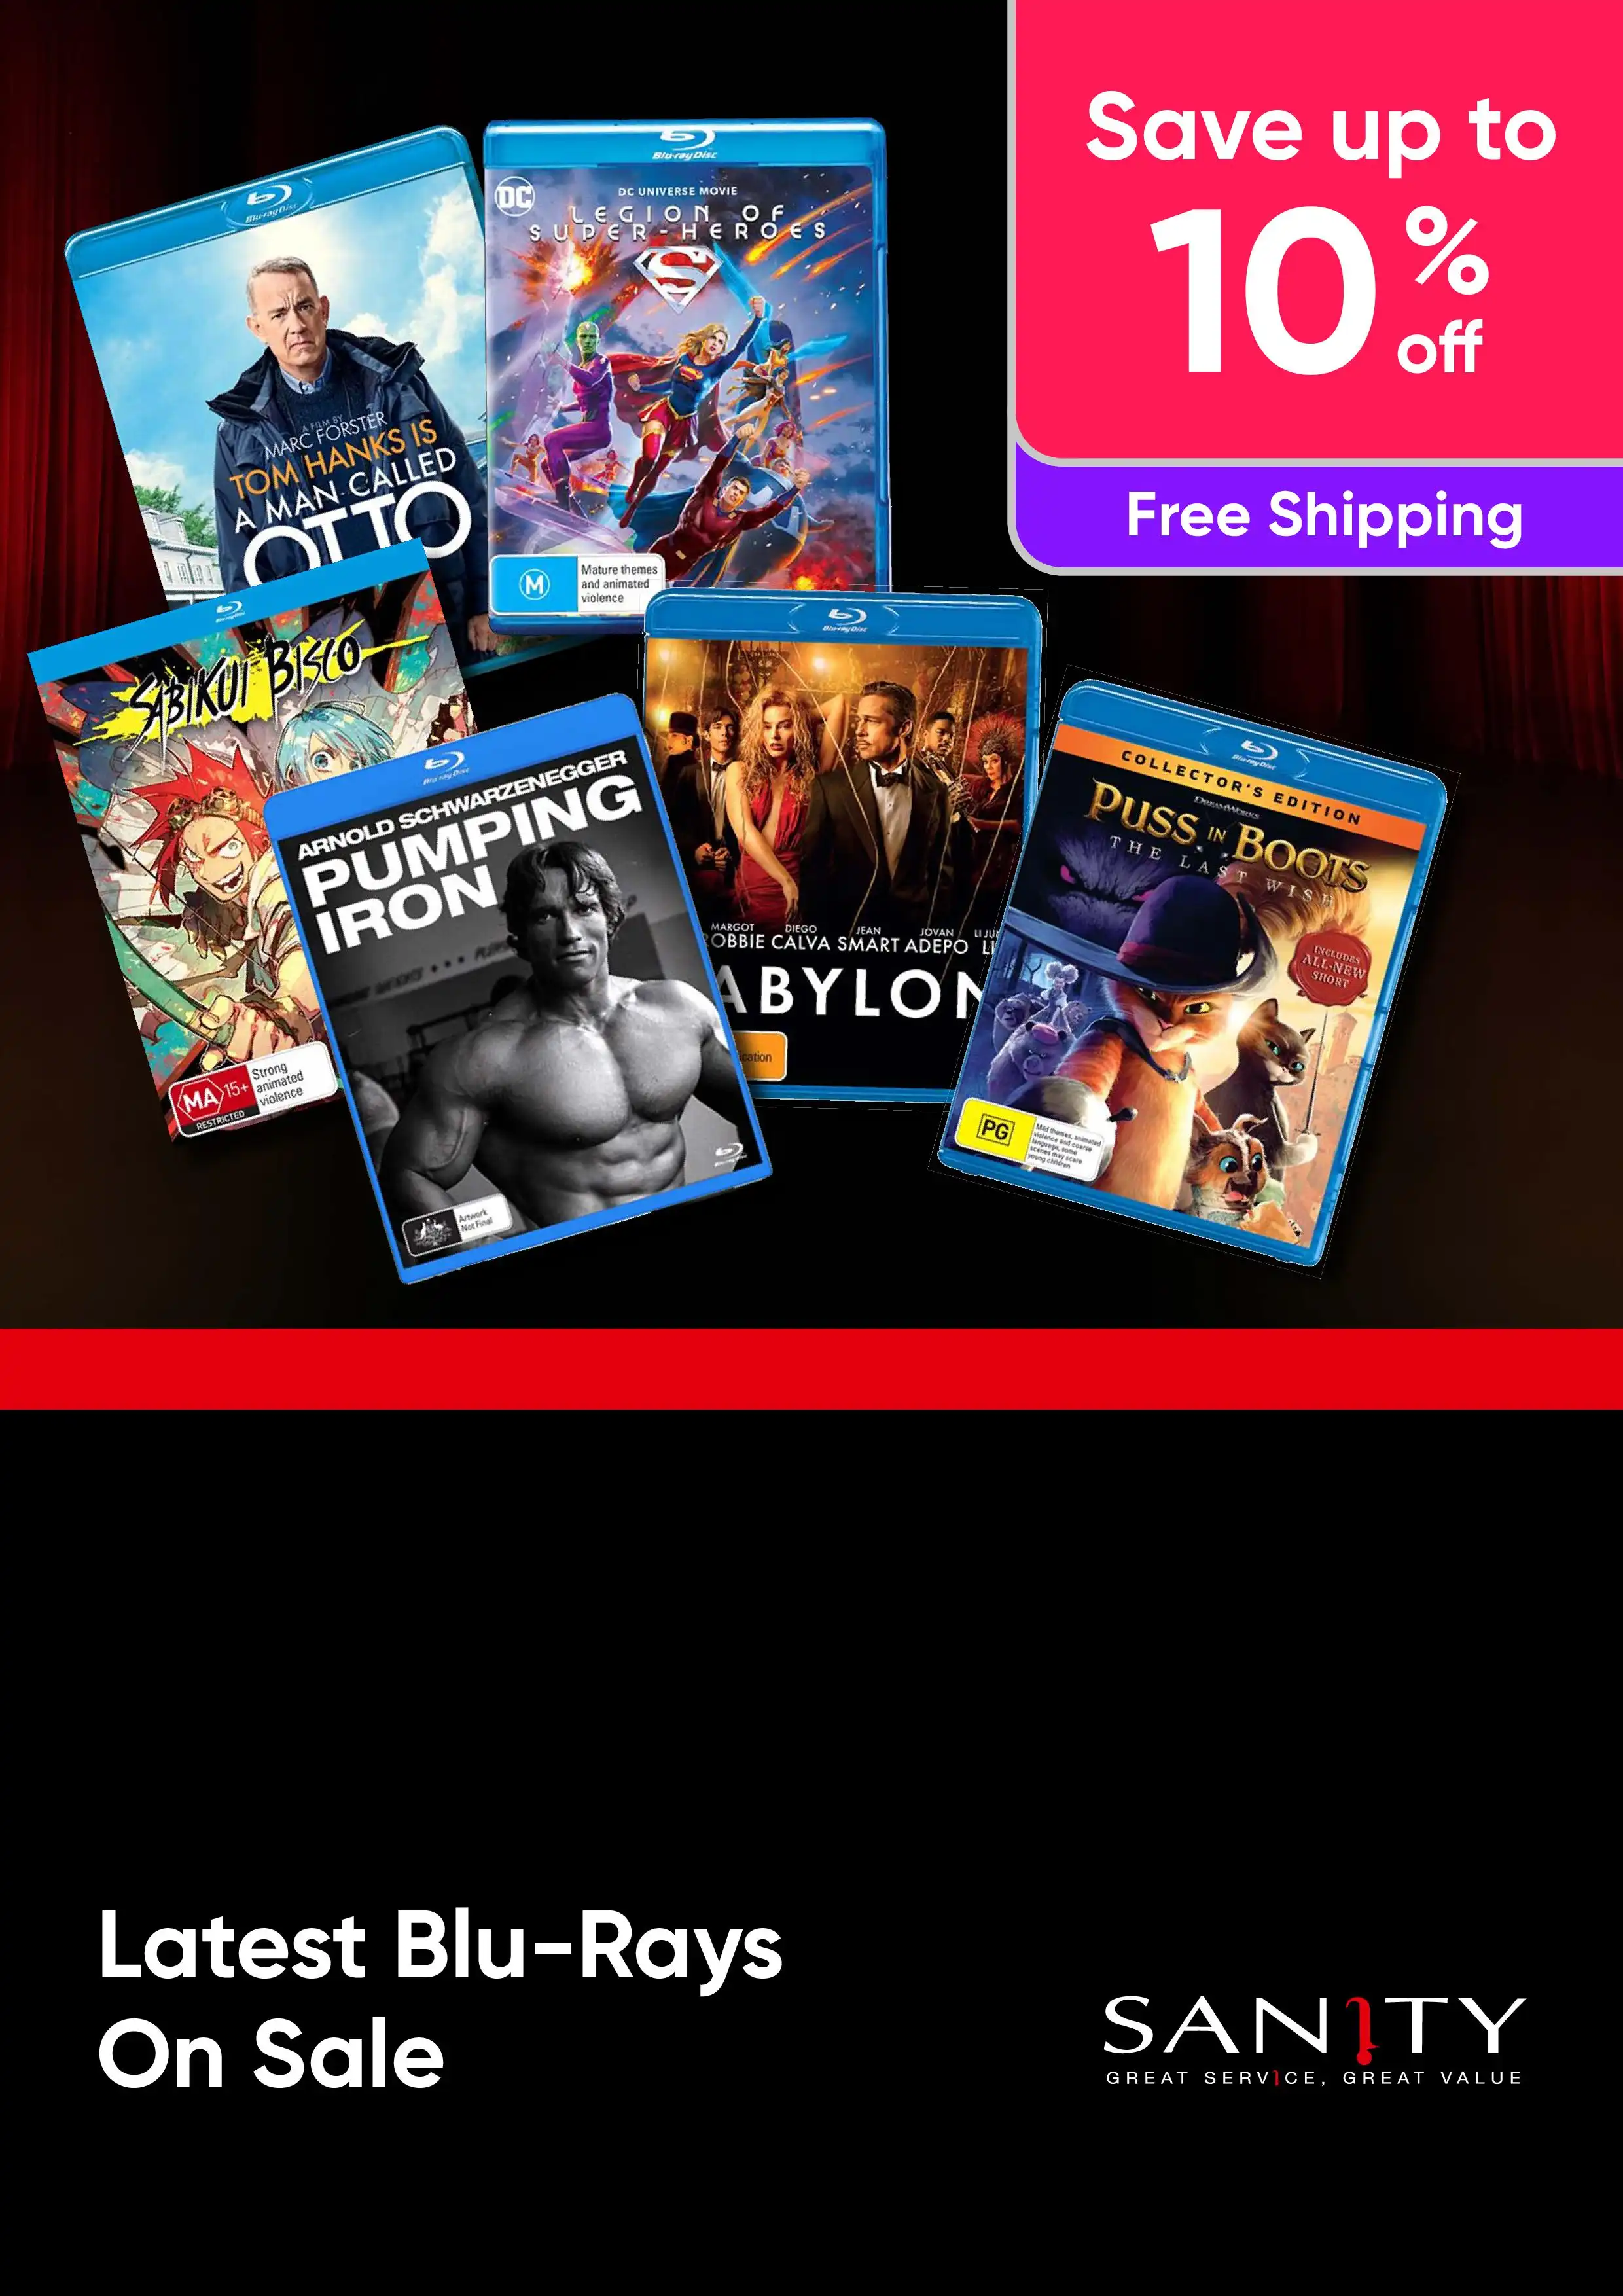 Latest Blu-Rays Sale -  Universal Sony Pictures, Roadshow, Disney - Up to 10% off